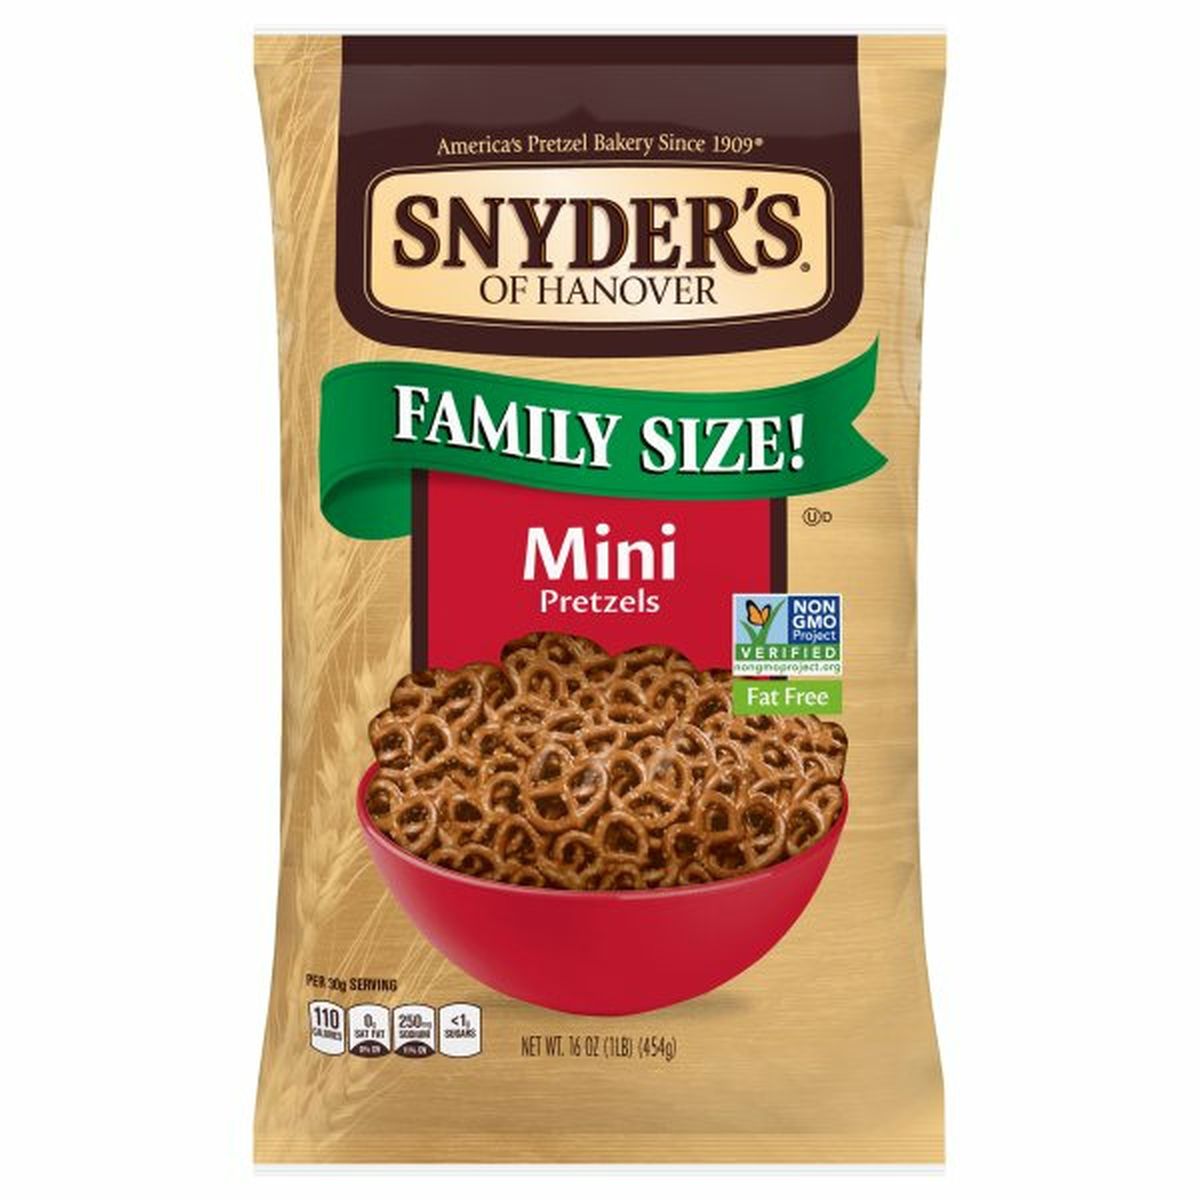 Calories in Snyder's of Hanovers Pretzels, Fat Free, Mini, Family Size